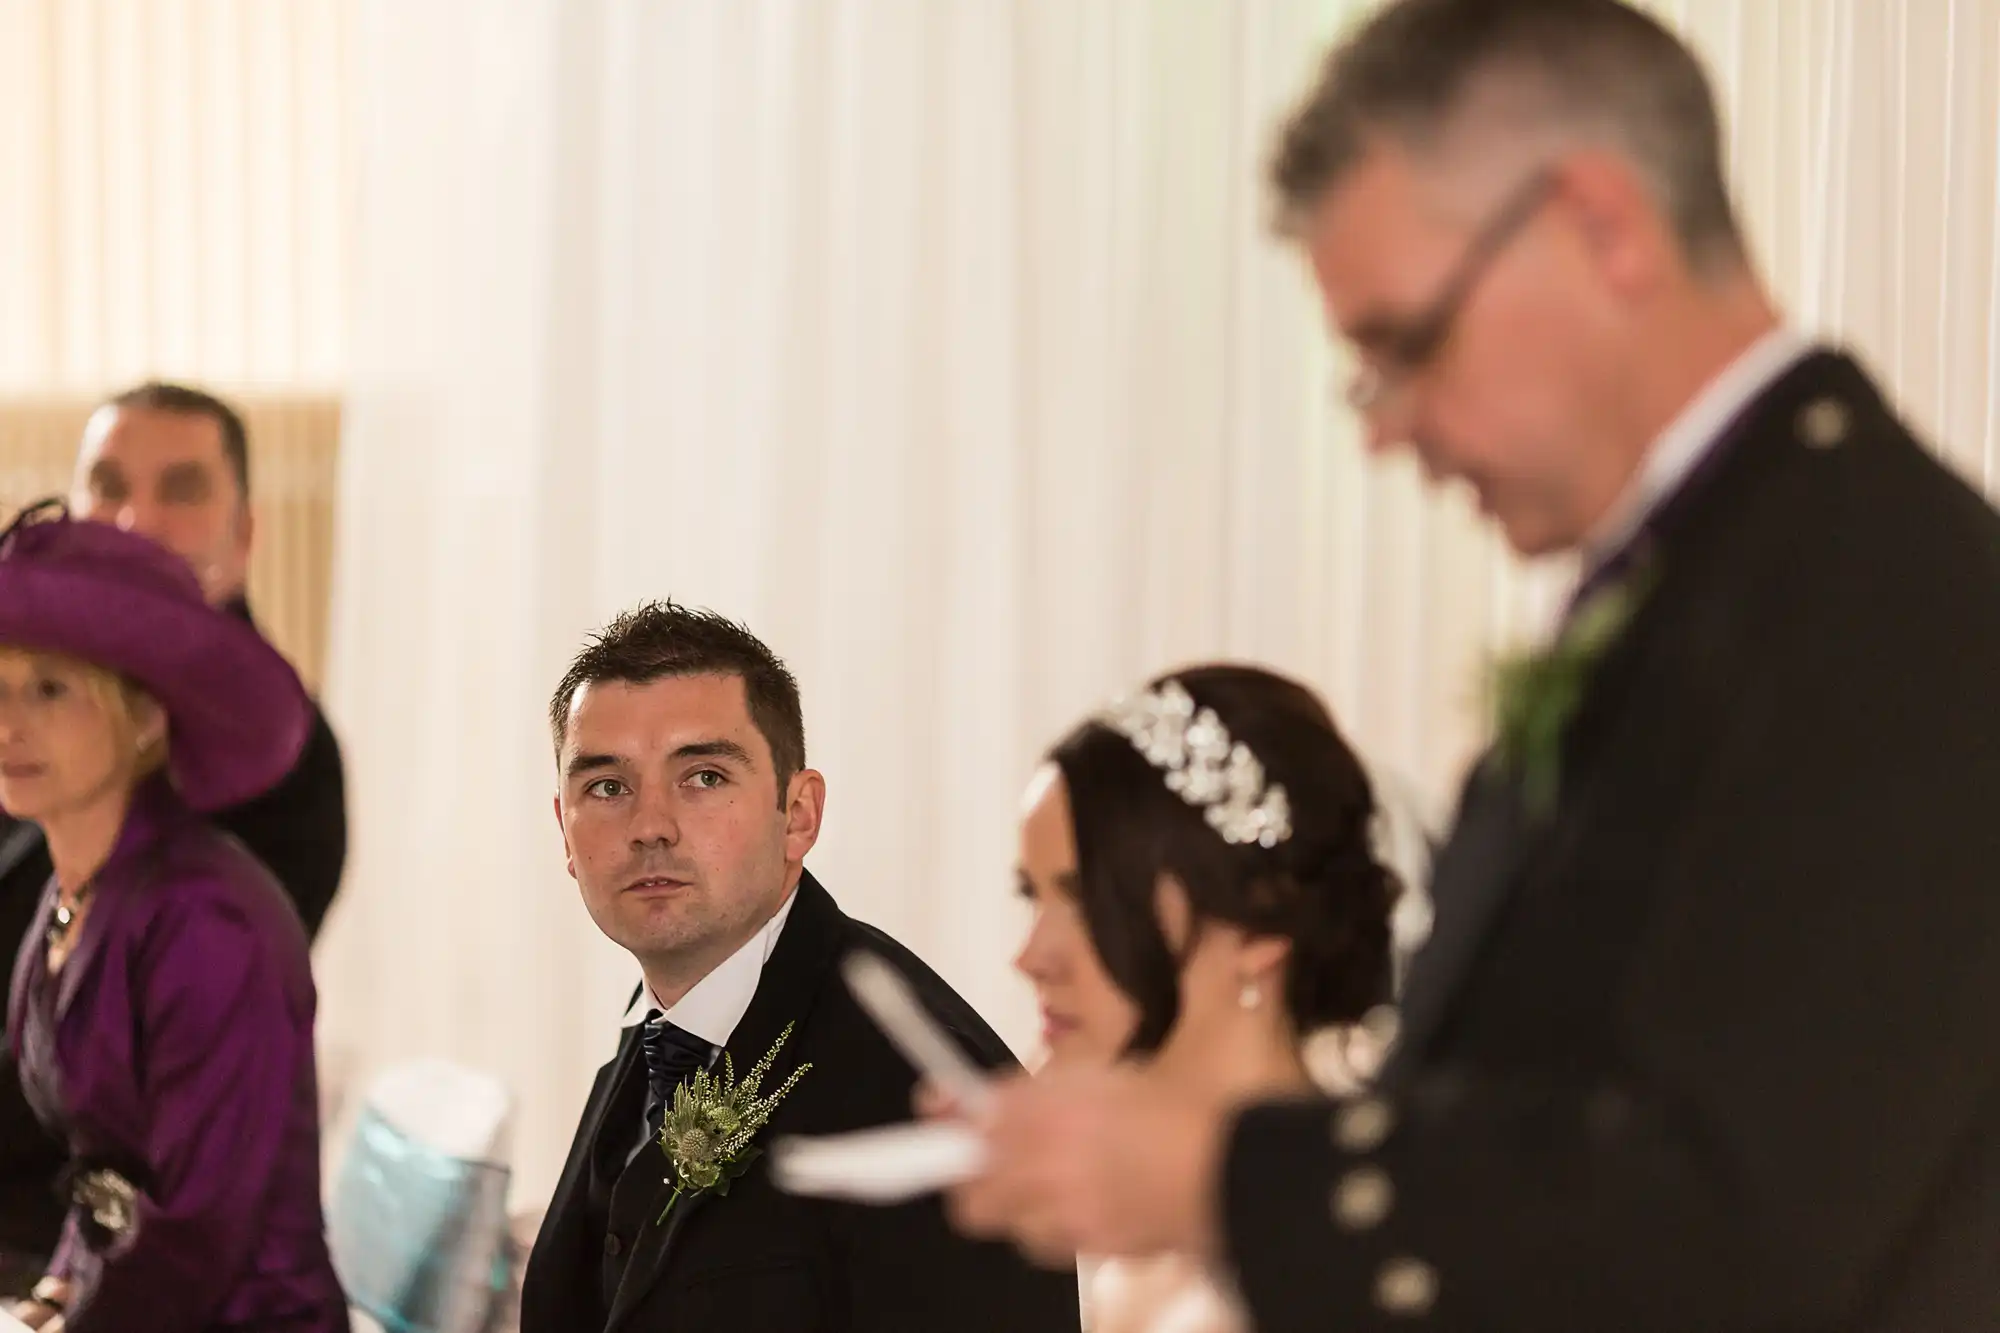 A groom in a black suit looks intently ahead during a wedding ceremony, with an officiant and wedding guests slightly blurred in the foreground and background.